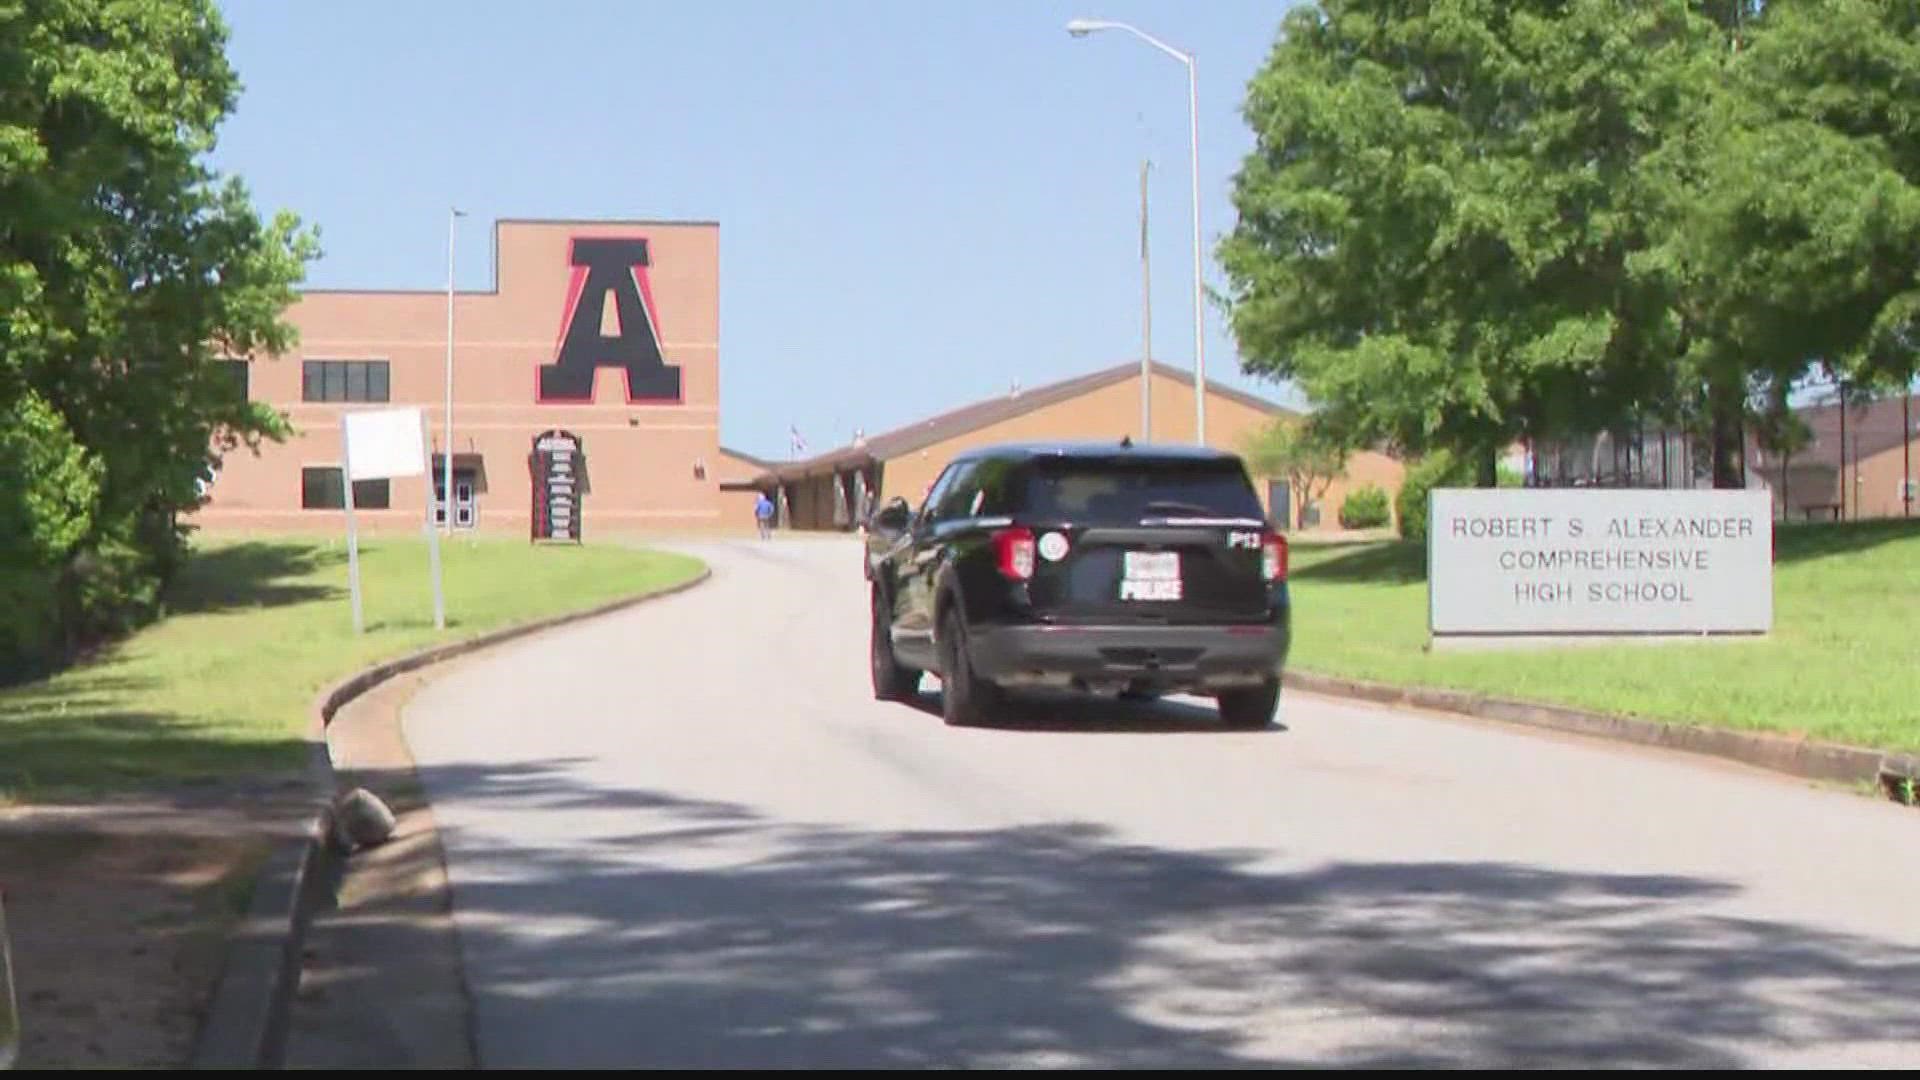 The student at the center of a manhunt Tuesday has turned himself in after authorities said he hurt one of his peers in an altercation at Alexander High School.